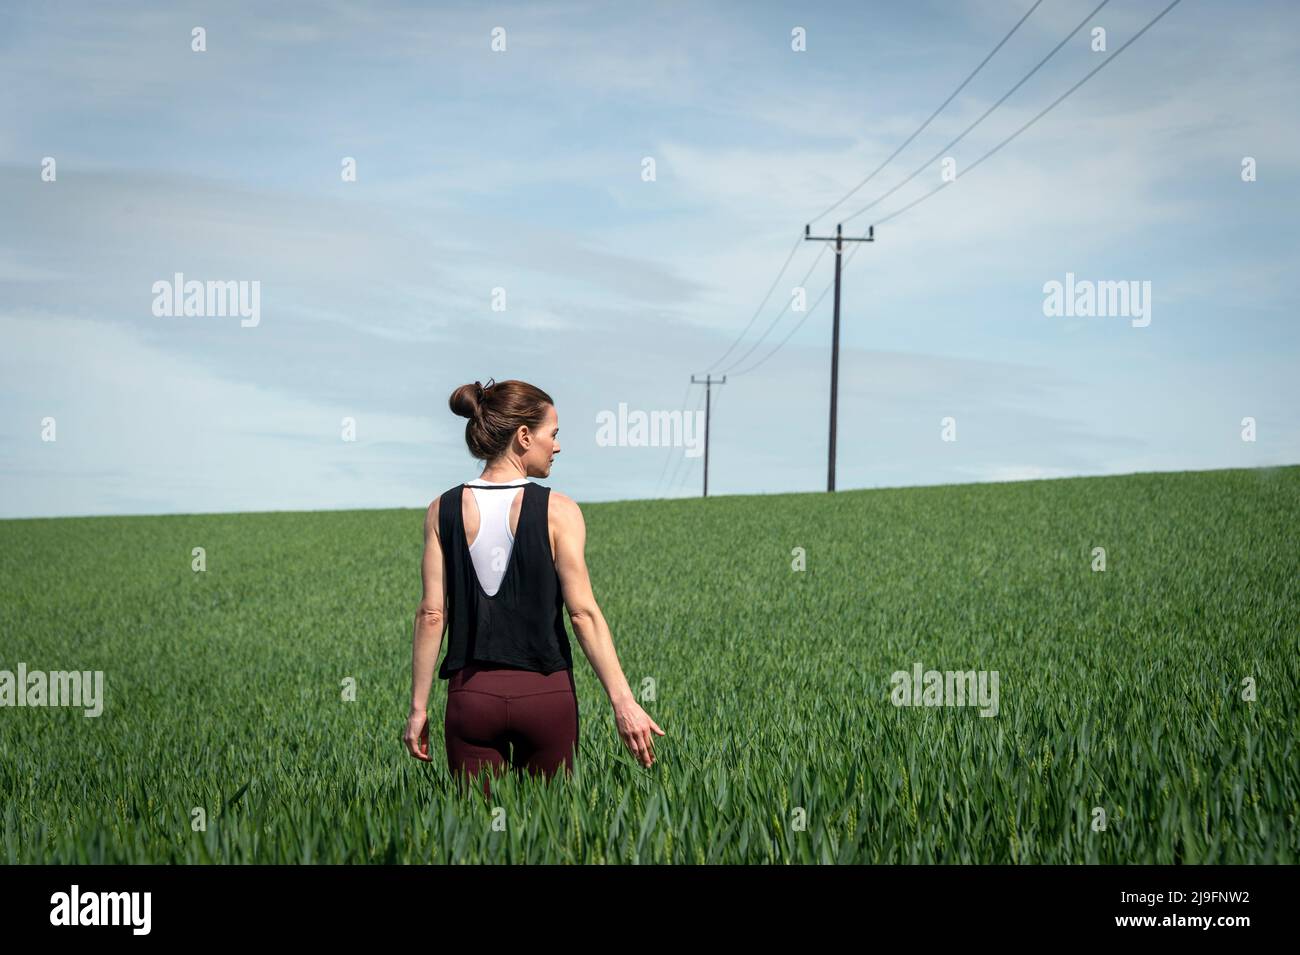 Rear view of an attractive woman walking through a field of wheat. Stock Photo